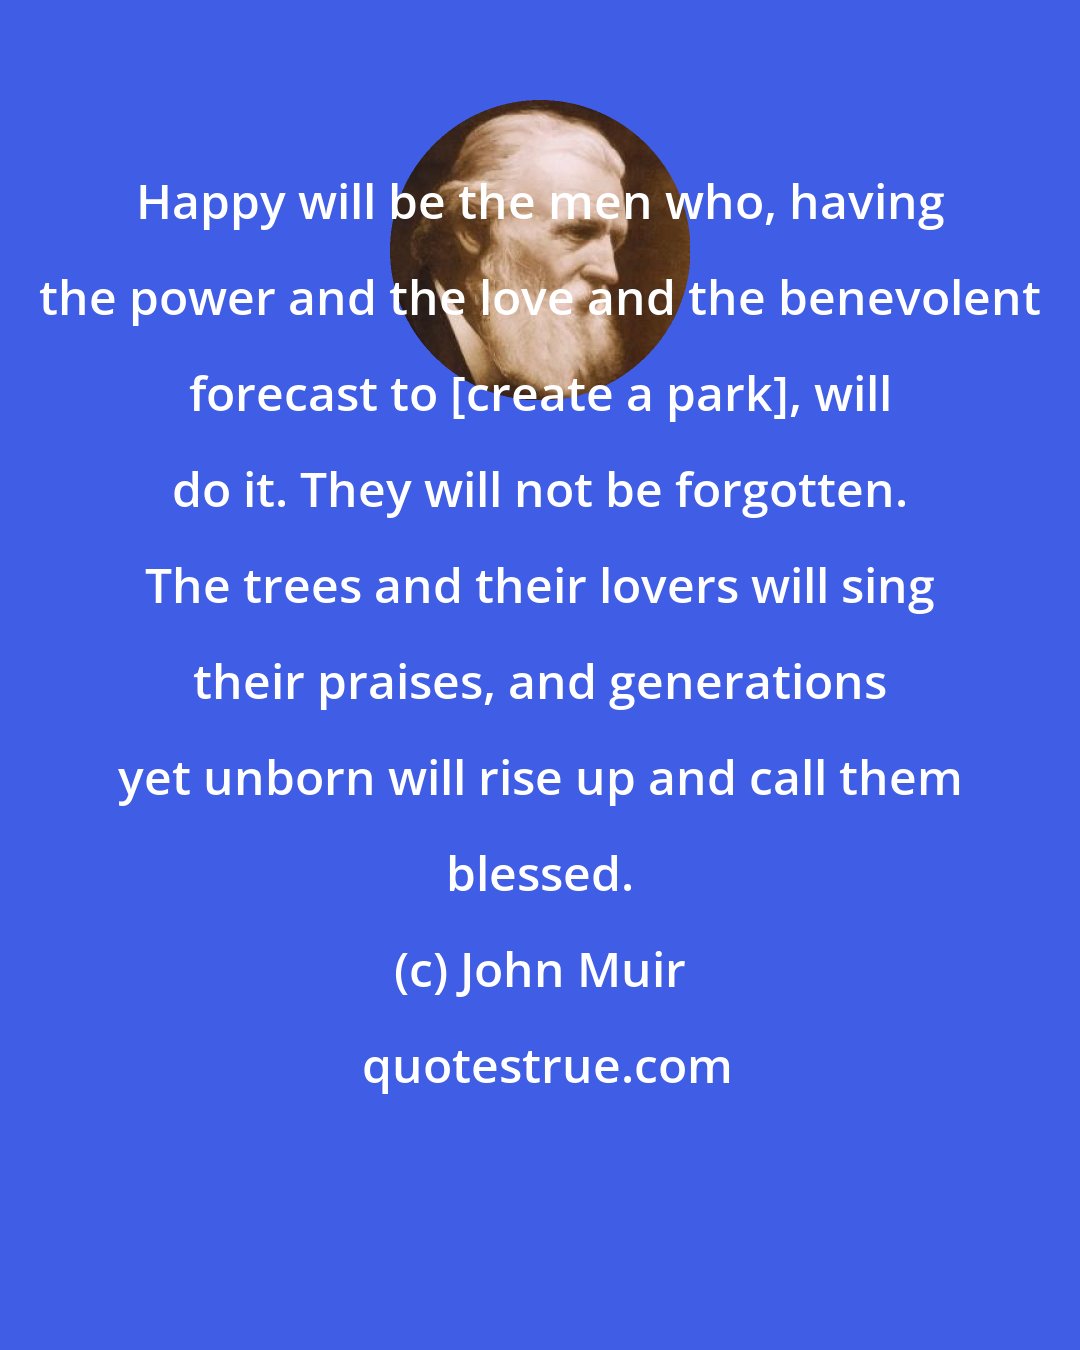 John Muir: Happy will be the men who, having the power and the love and the benevolent forecast to [create a park], will do it. They will not be forgotten. The trees and their lovers will sing their praises, and generations yet unborn will rise up and call them blessed.